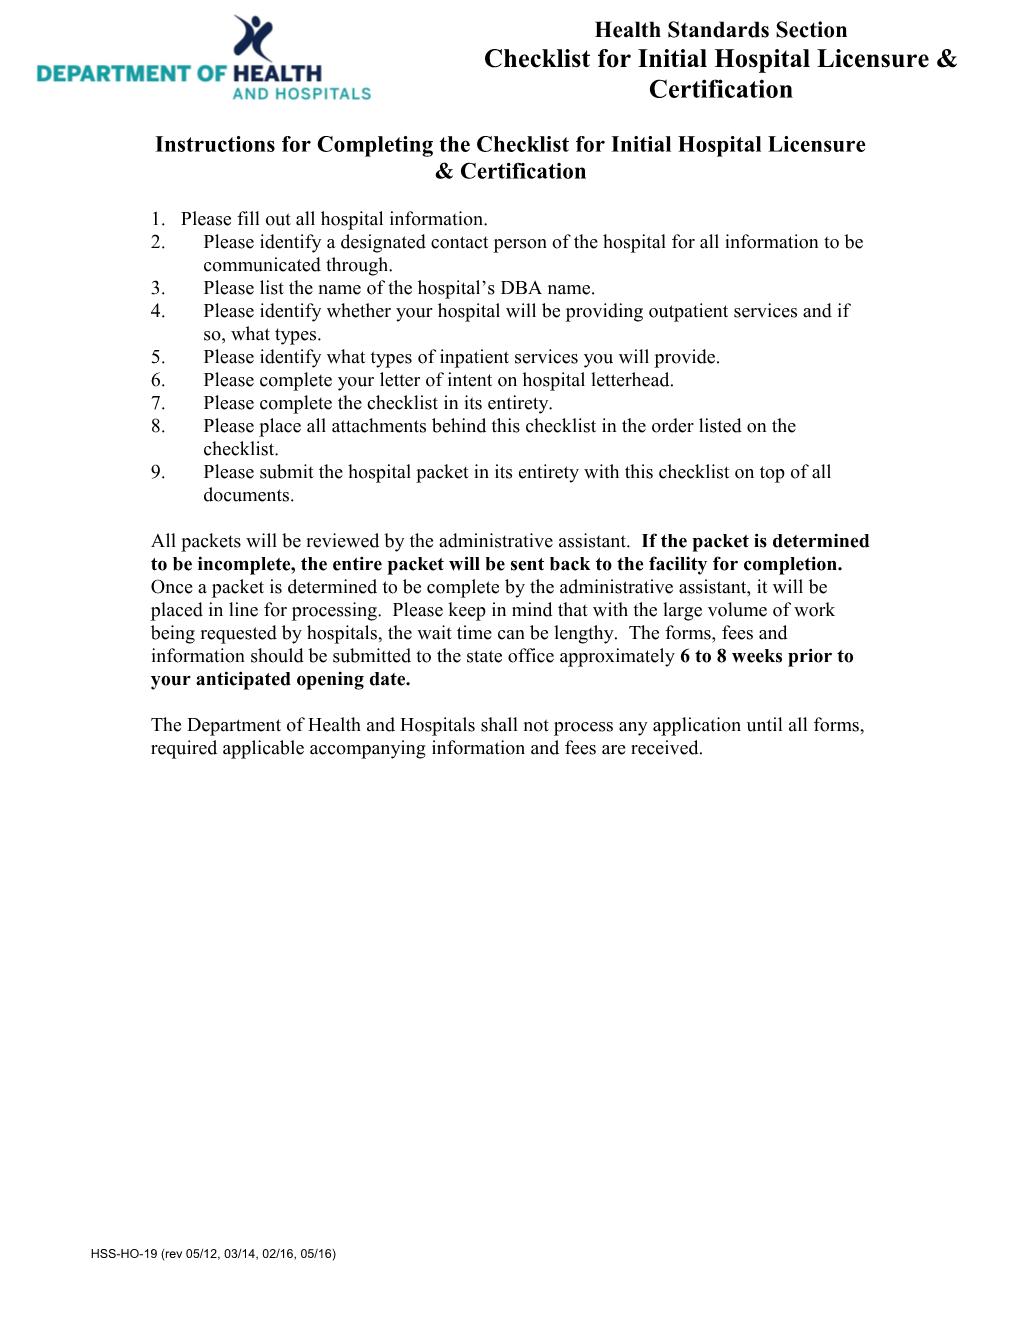 Instructions for Completing the Checklist for Initial Hospital Licensure & Certification